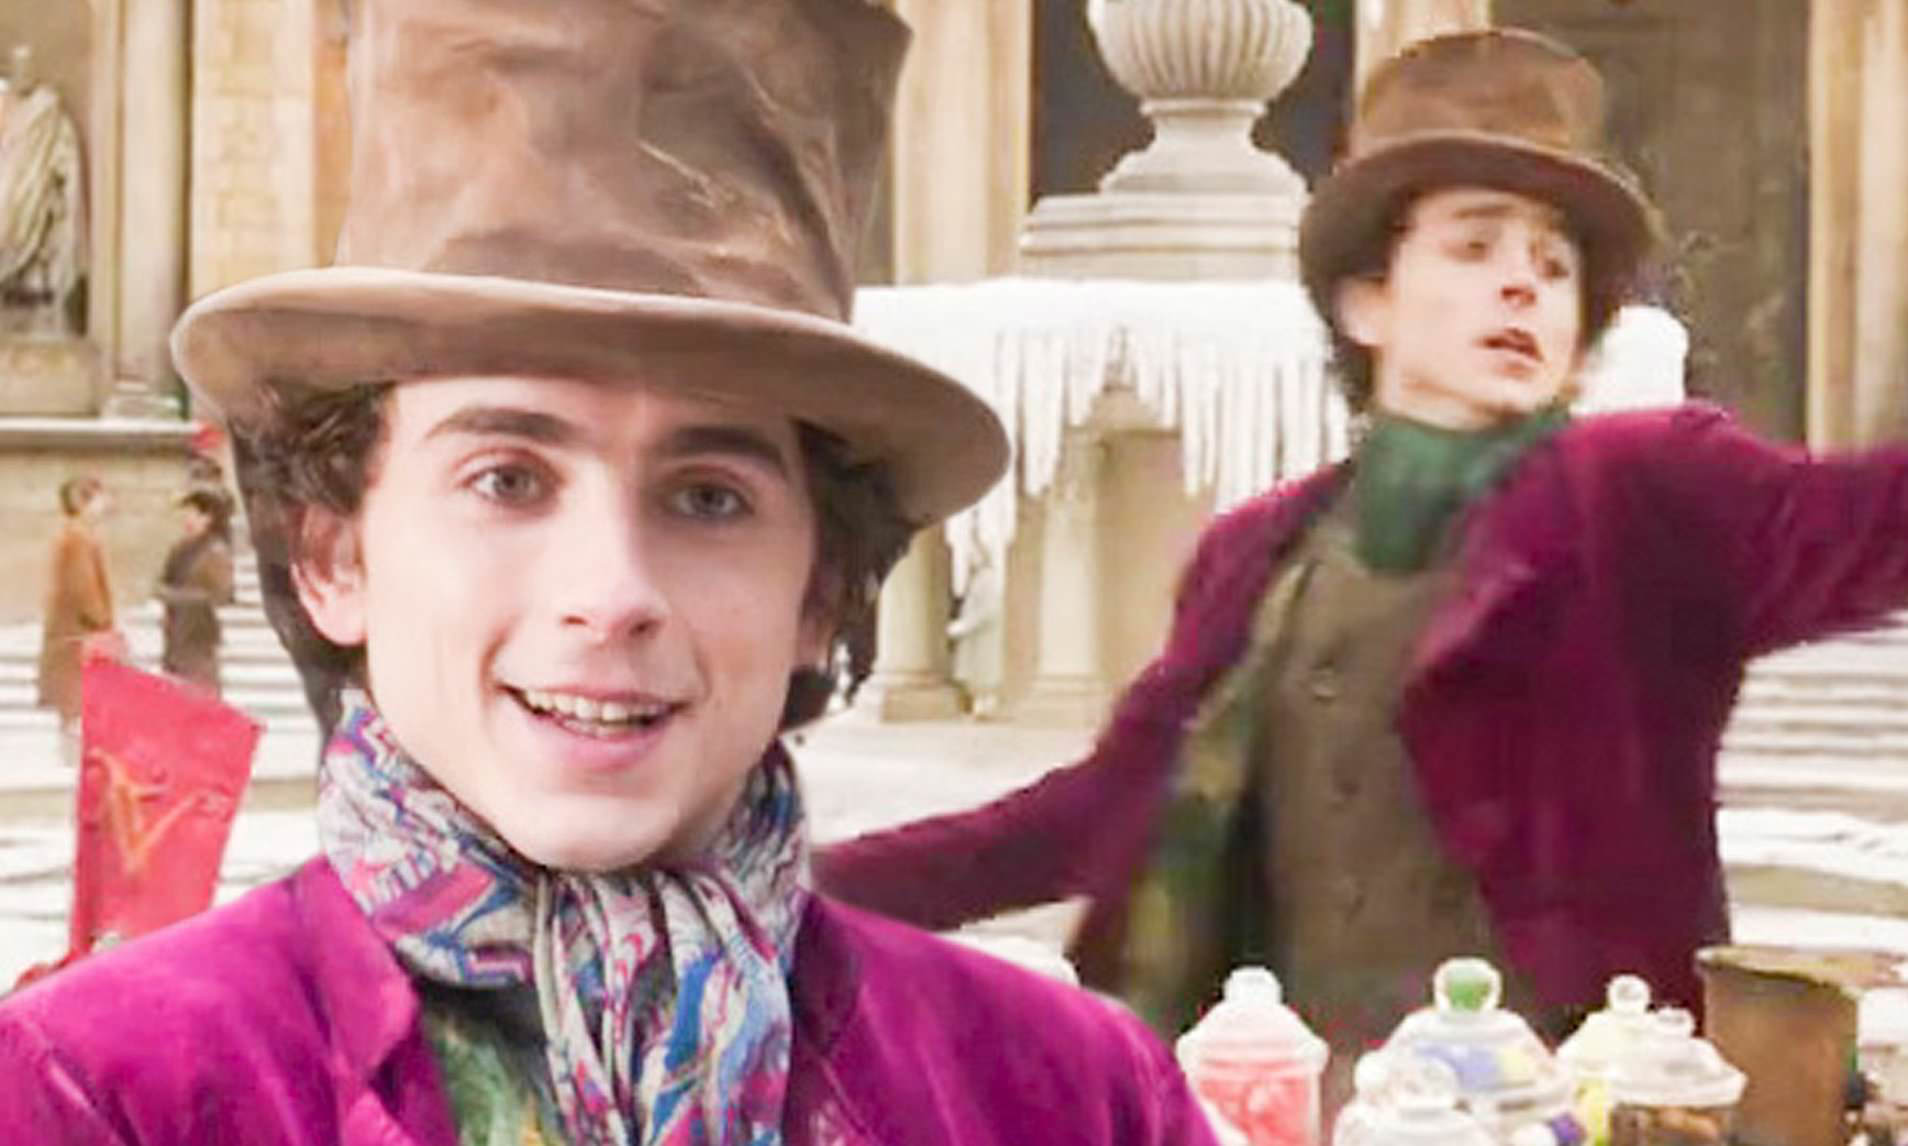 Timothee Chalamet praised for 'pitch-perfect performance' in Wonka